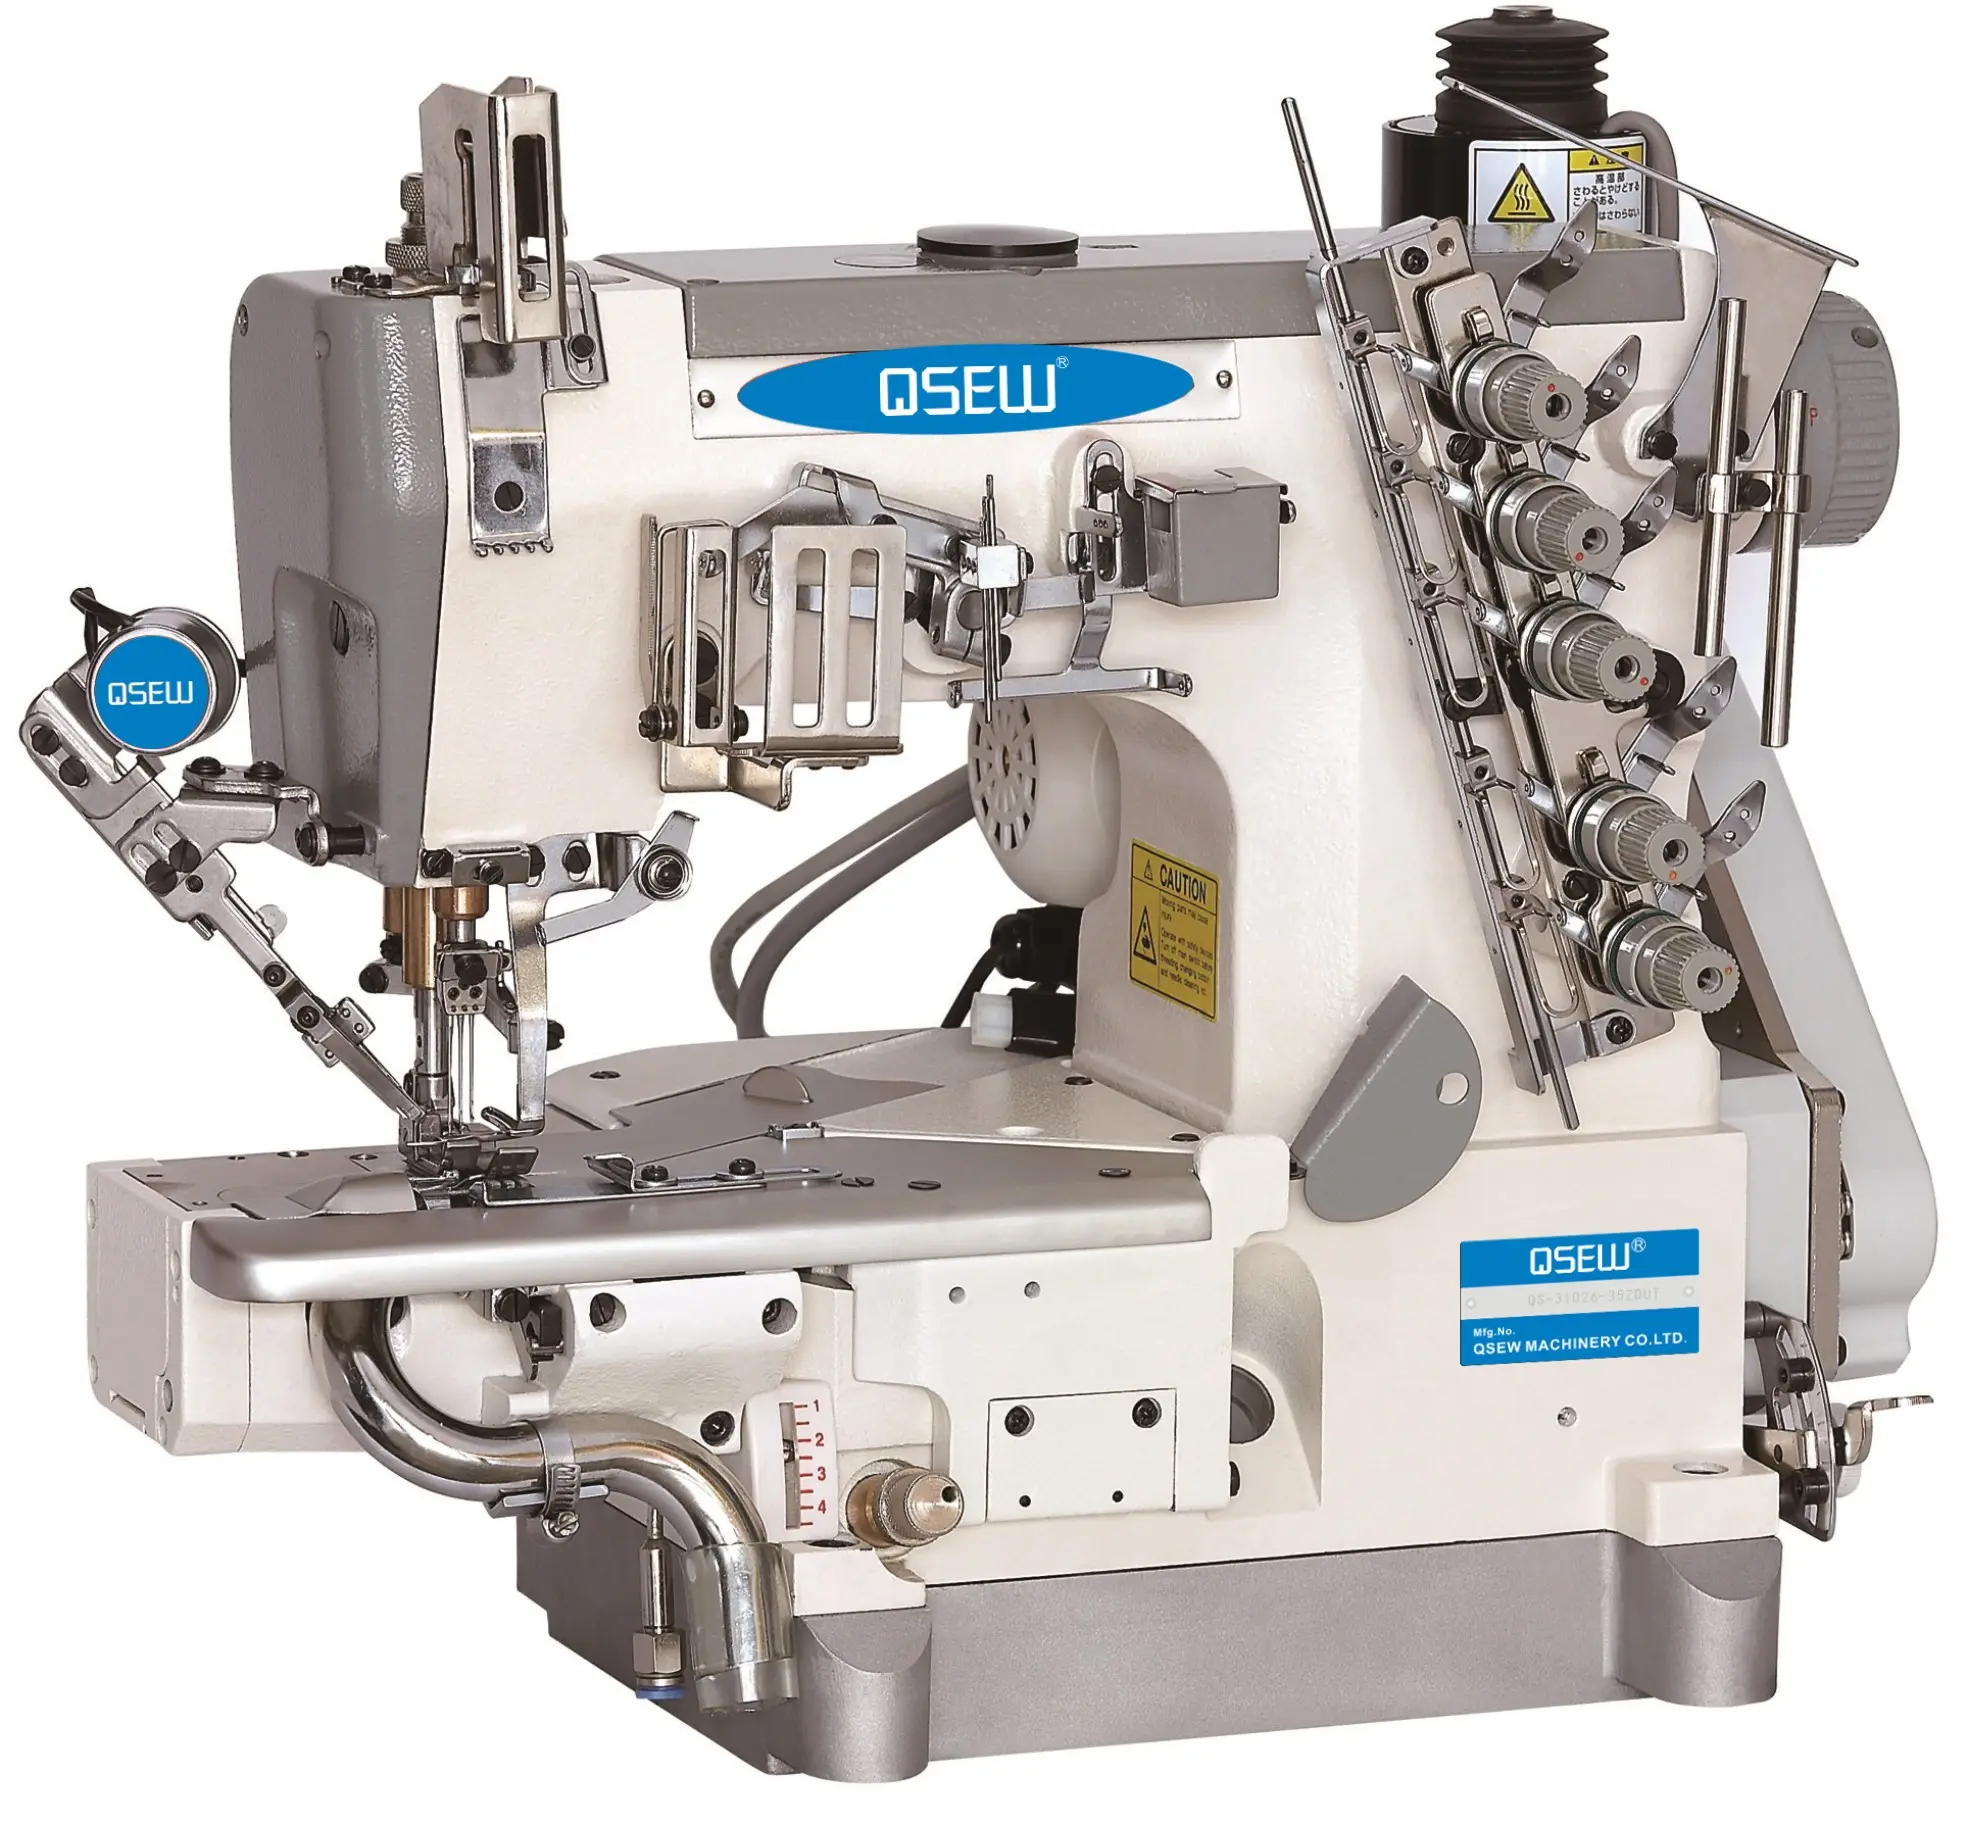 QS-600D-35ZD cylinder bed direct drive high speed left cutter interlock industrial sewing machine